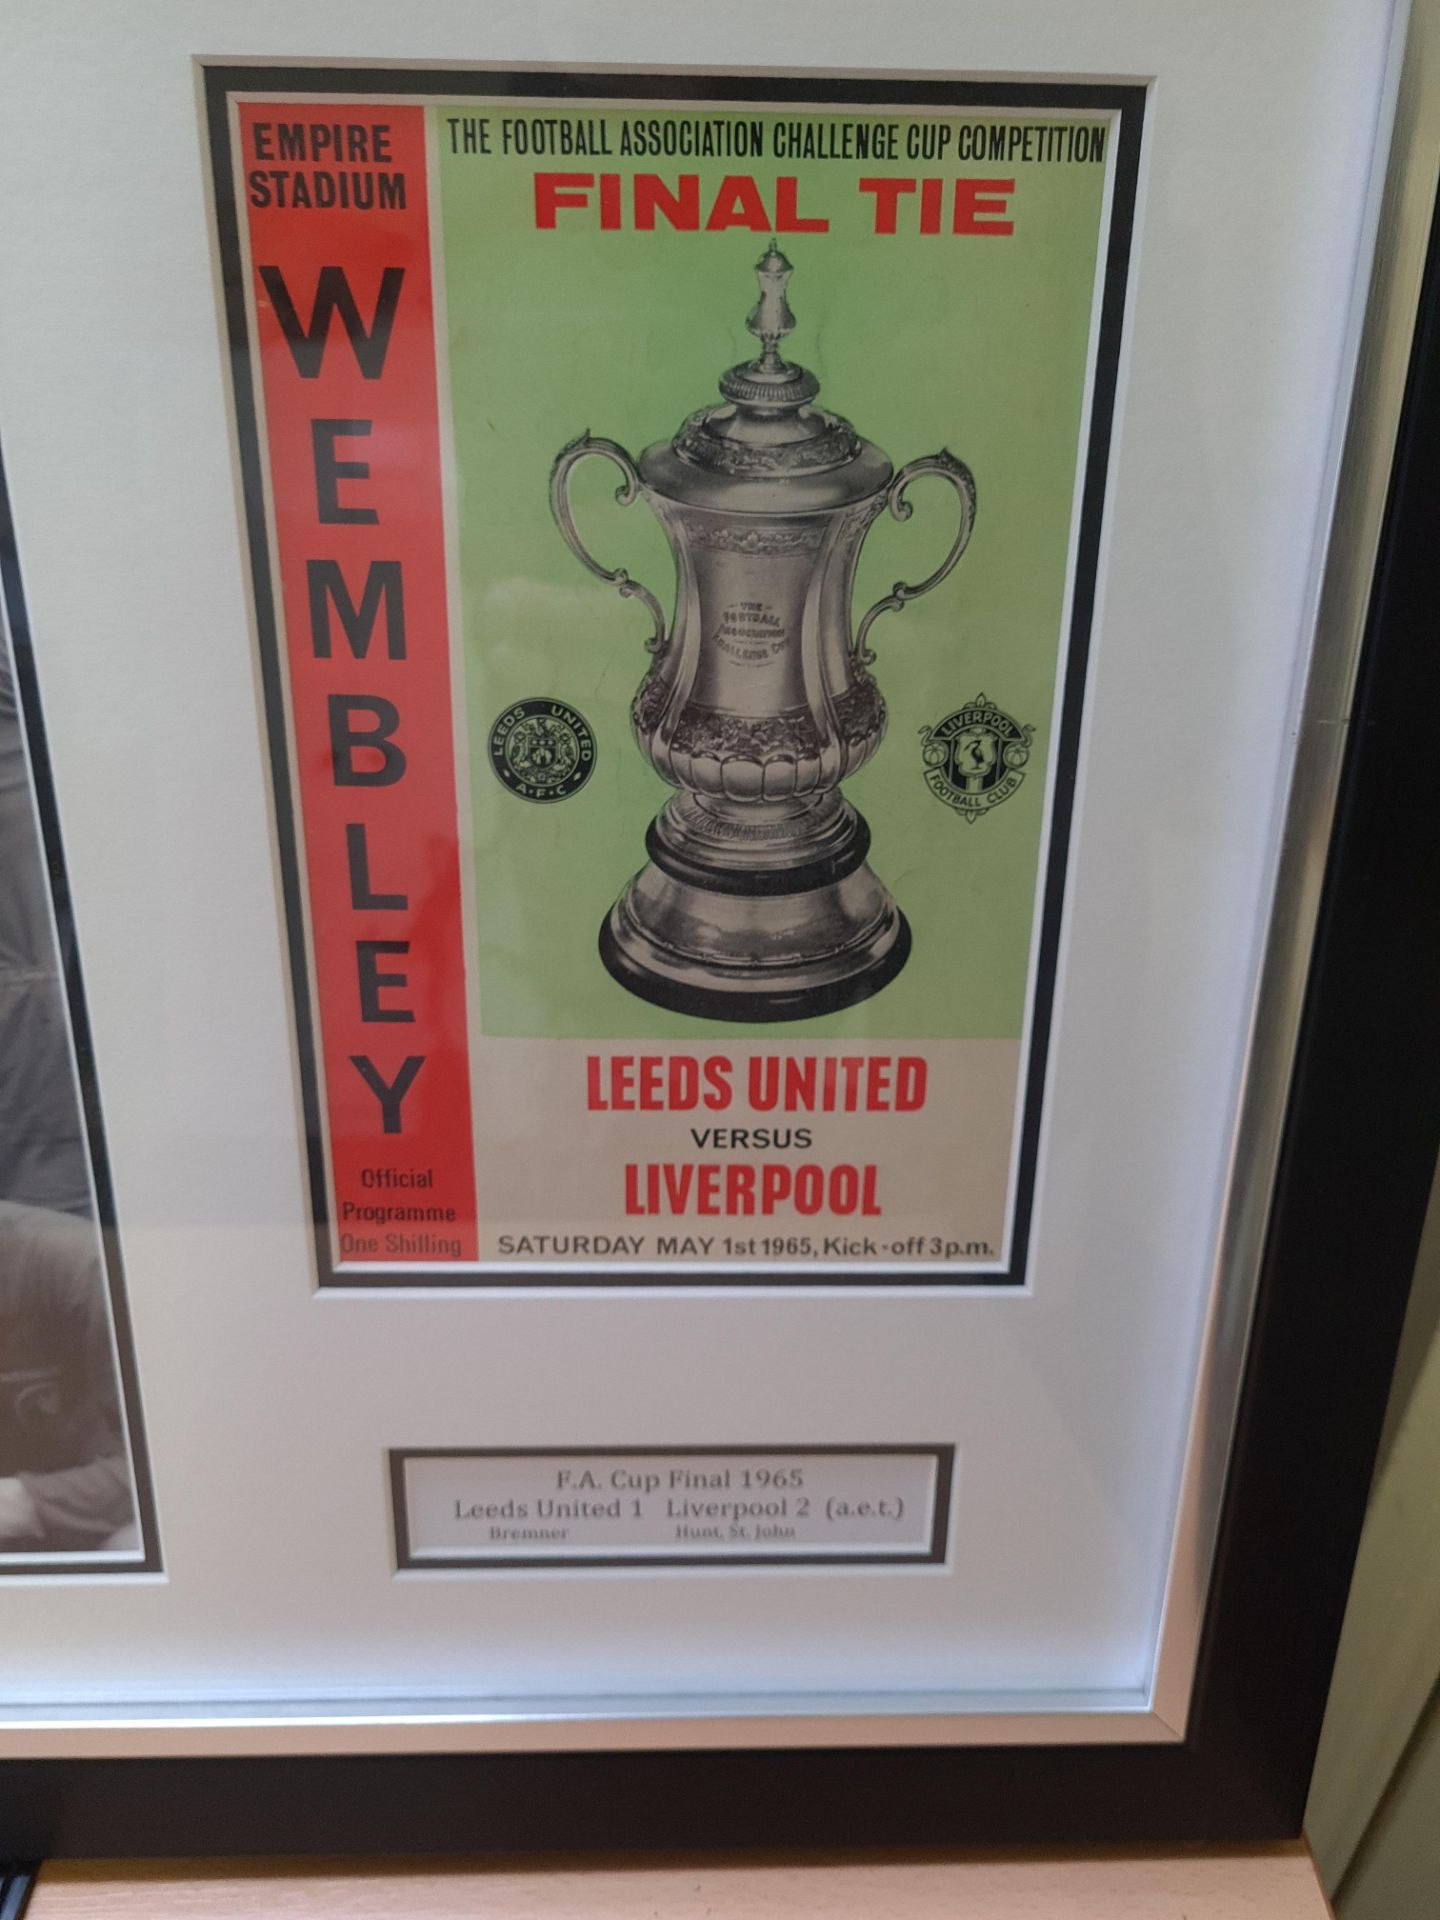 Signed Framed Photo & Match Programme - FA Cup Final 1965 Leeds v Liverpool (1-2 aet), 30" x 18.5" - Image 2 of 5